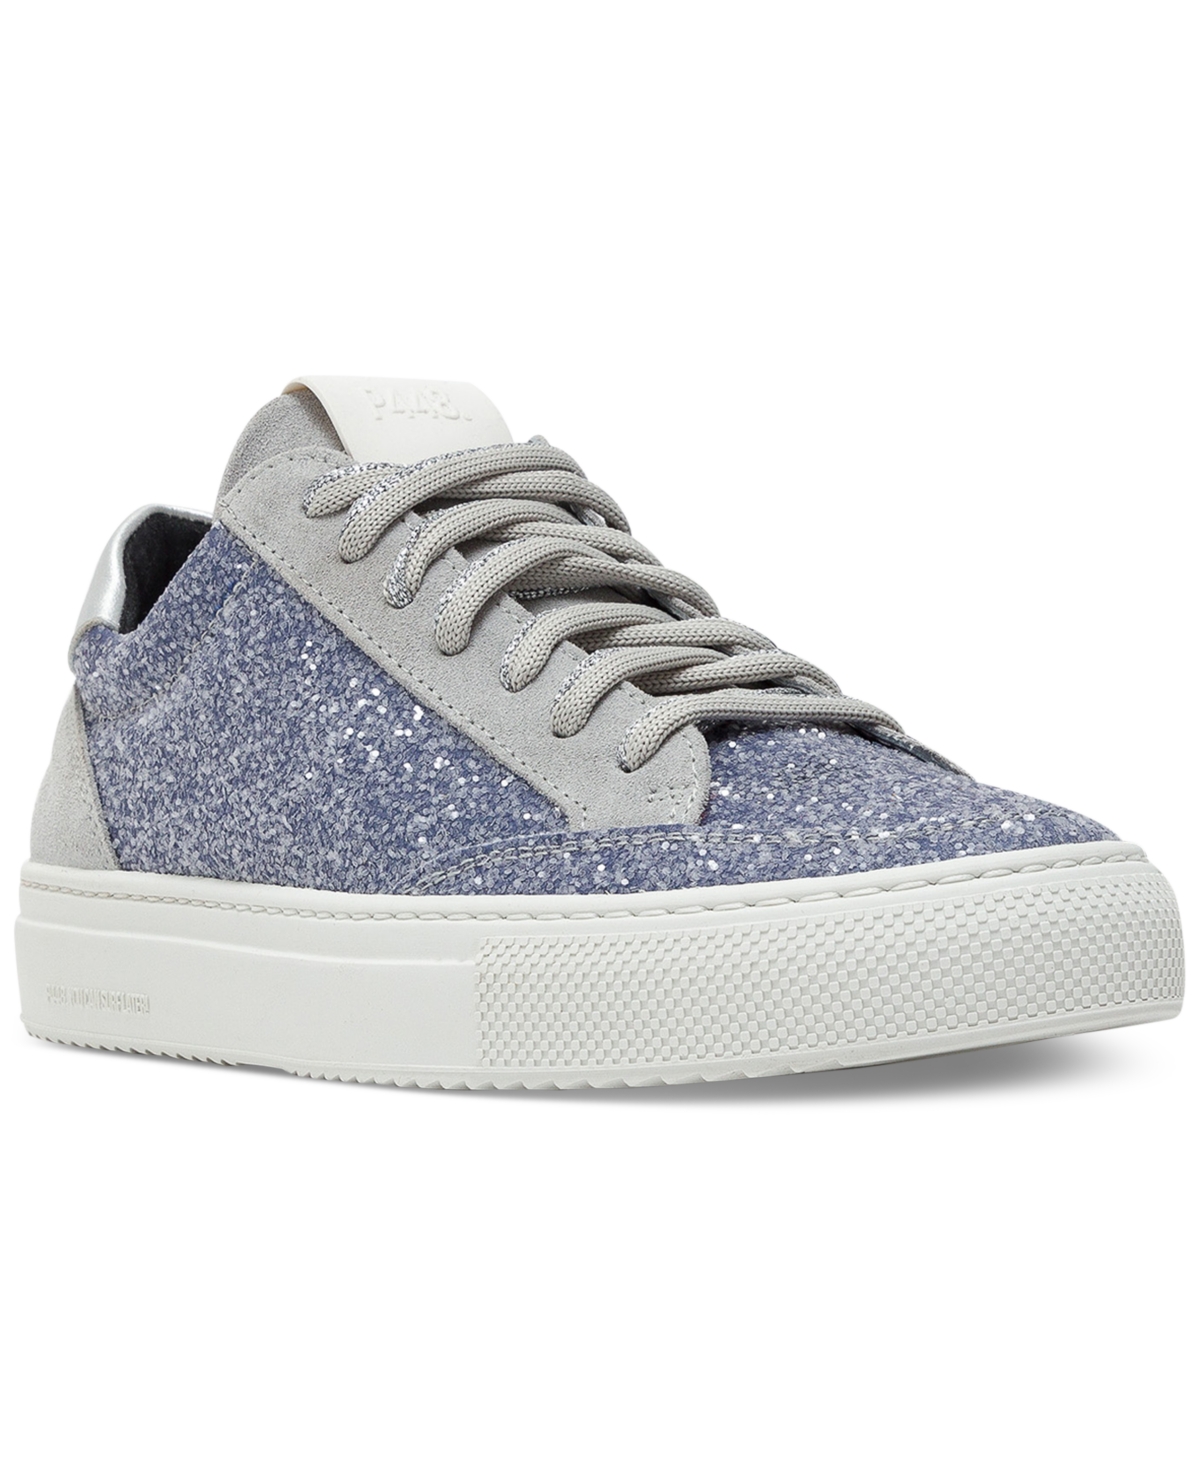 Women's Soho Lace-Up Mid-Top Sneakers - Iris/spark